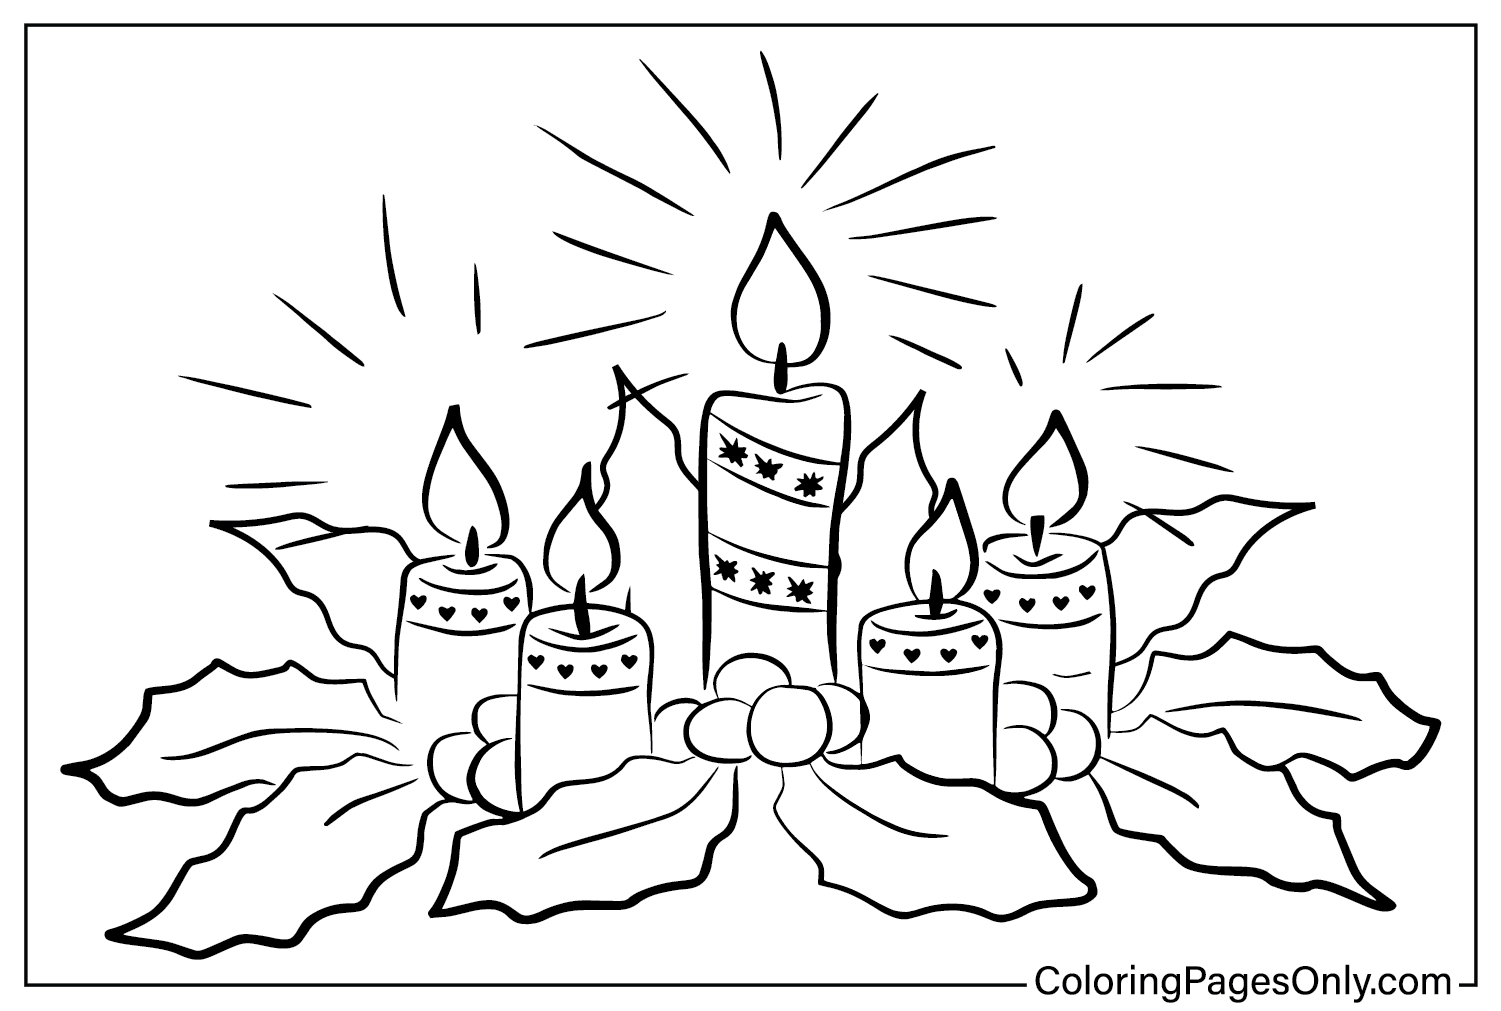 Drawing Advent Wreath Coloring Page from Advent Wreath